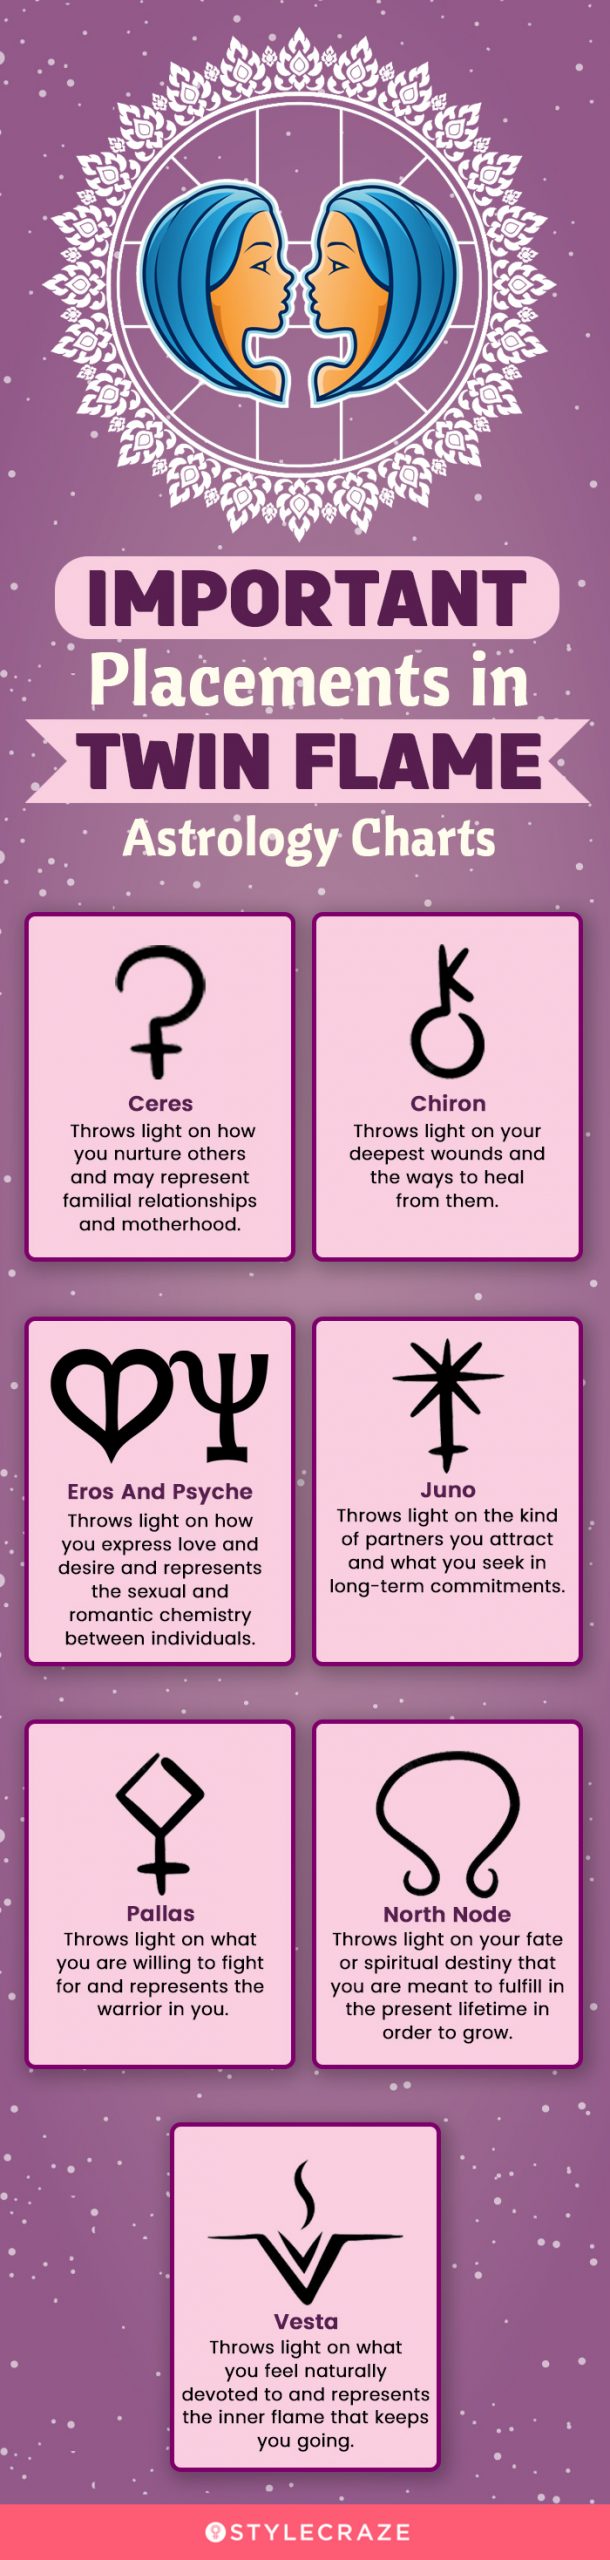 important placements in twin flame astrology charts [infographic]